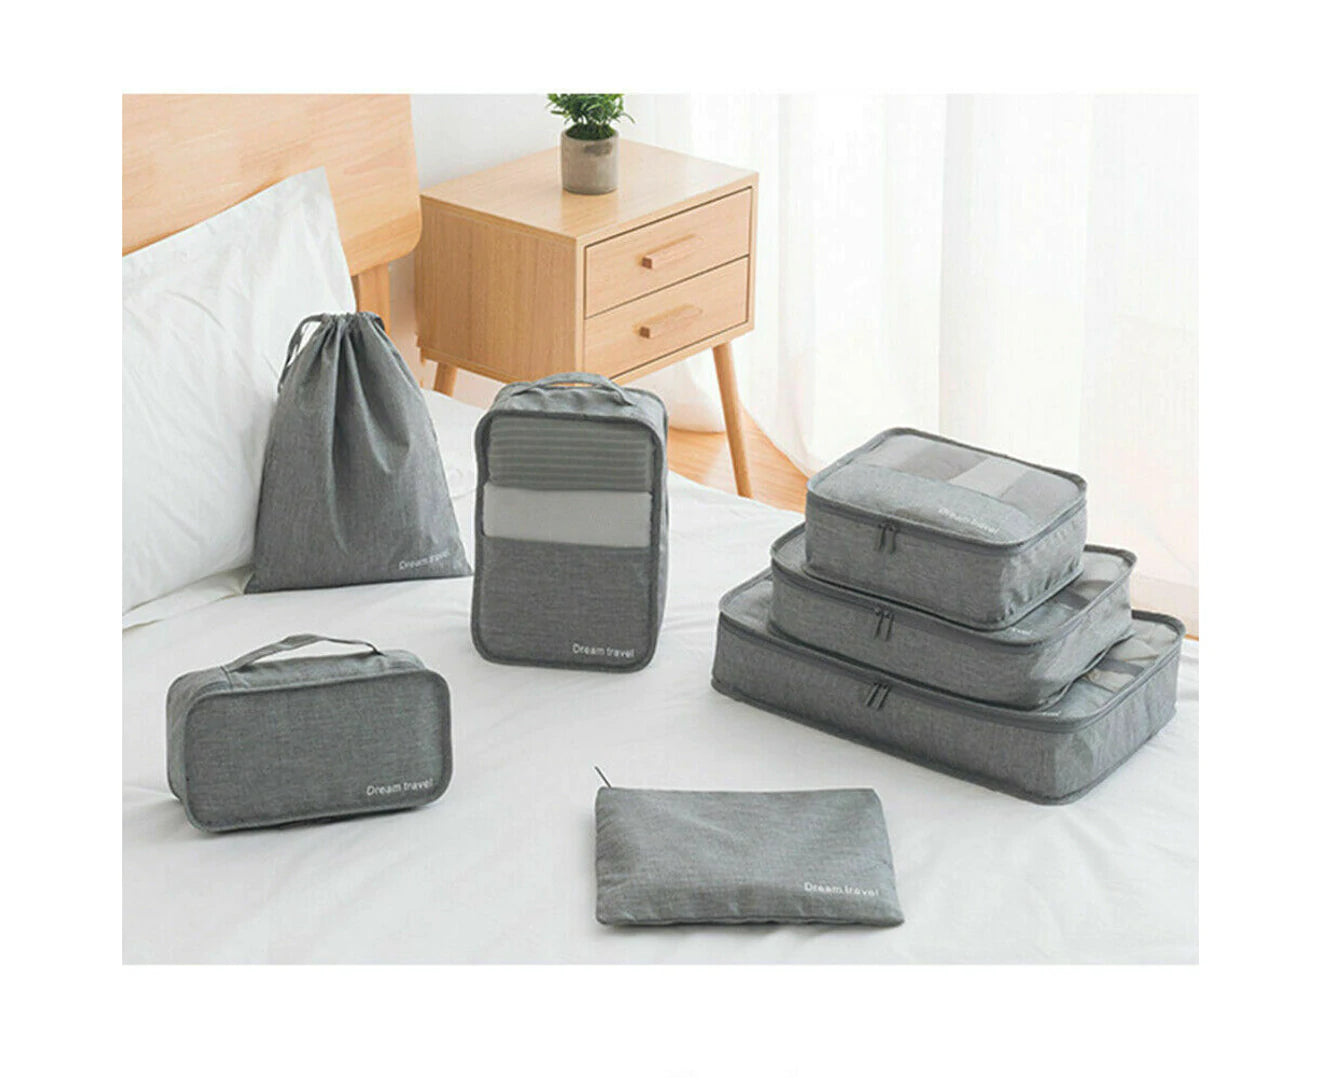 7Pcs Packing Cubes Luggage Organiser Travel Pouches Clothes Suitcase Storage Bag